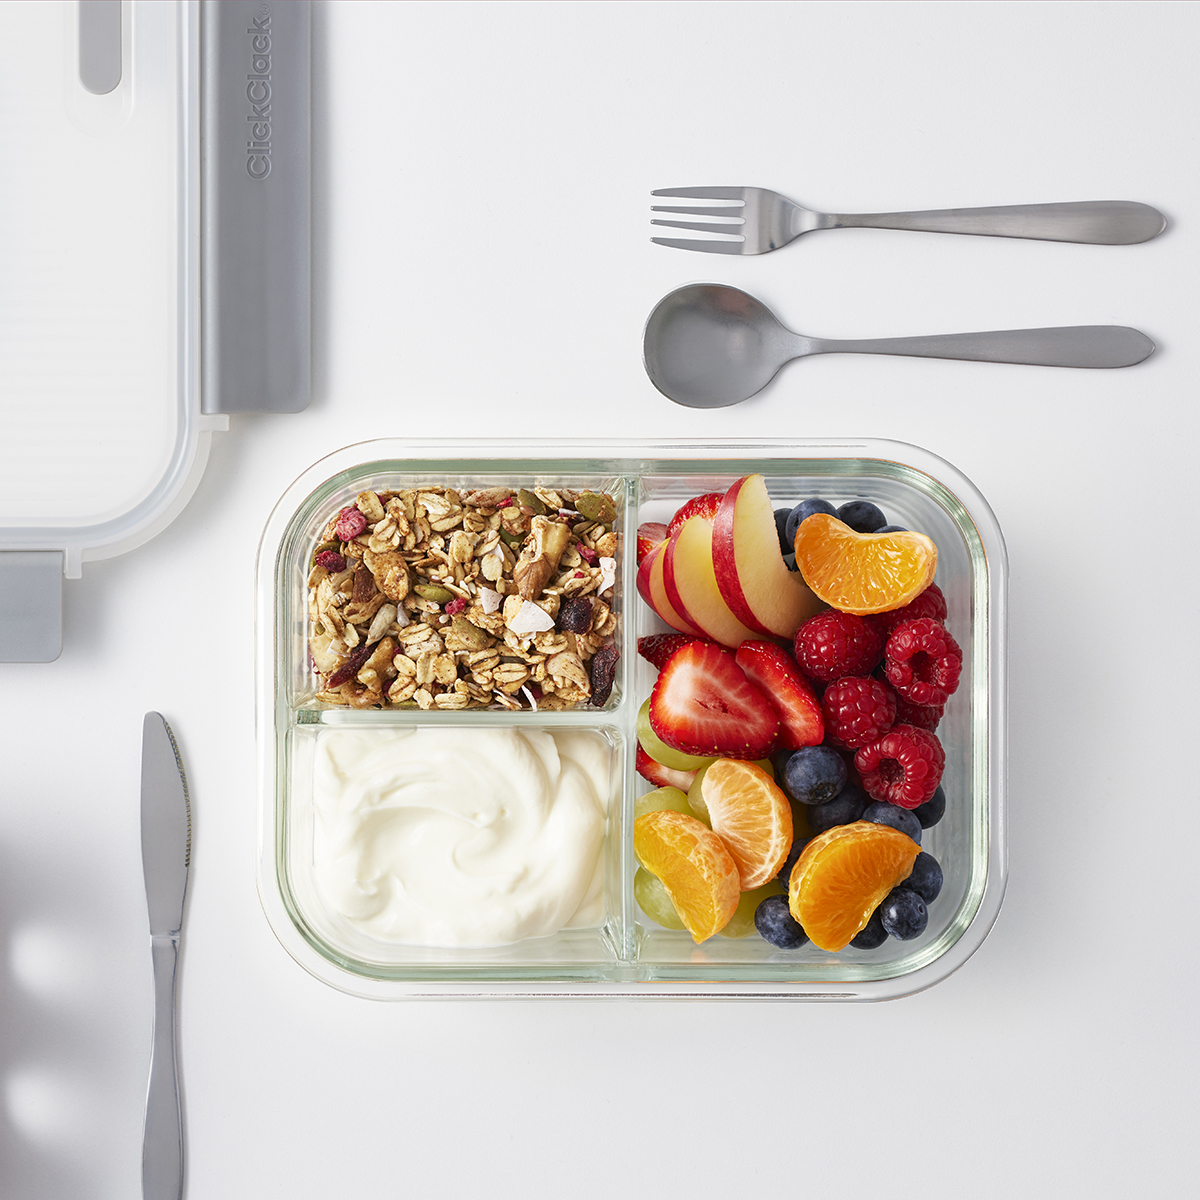 https://www.containerstore.com/catalogimages/425712/10084607-DAILY-BENTO-Breakfast-Click.jpg